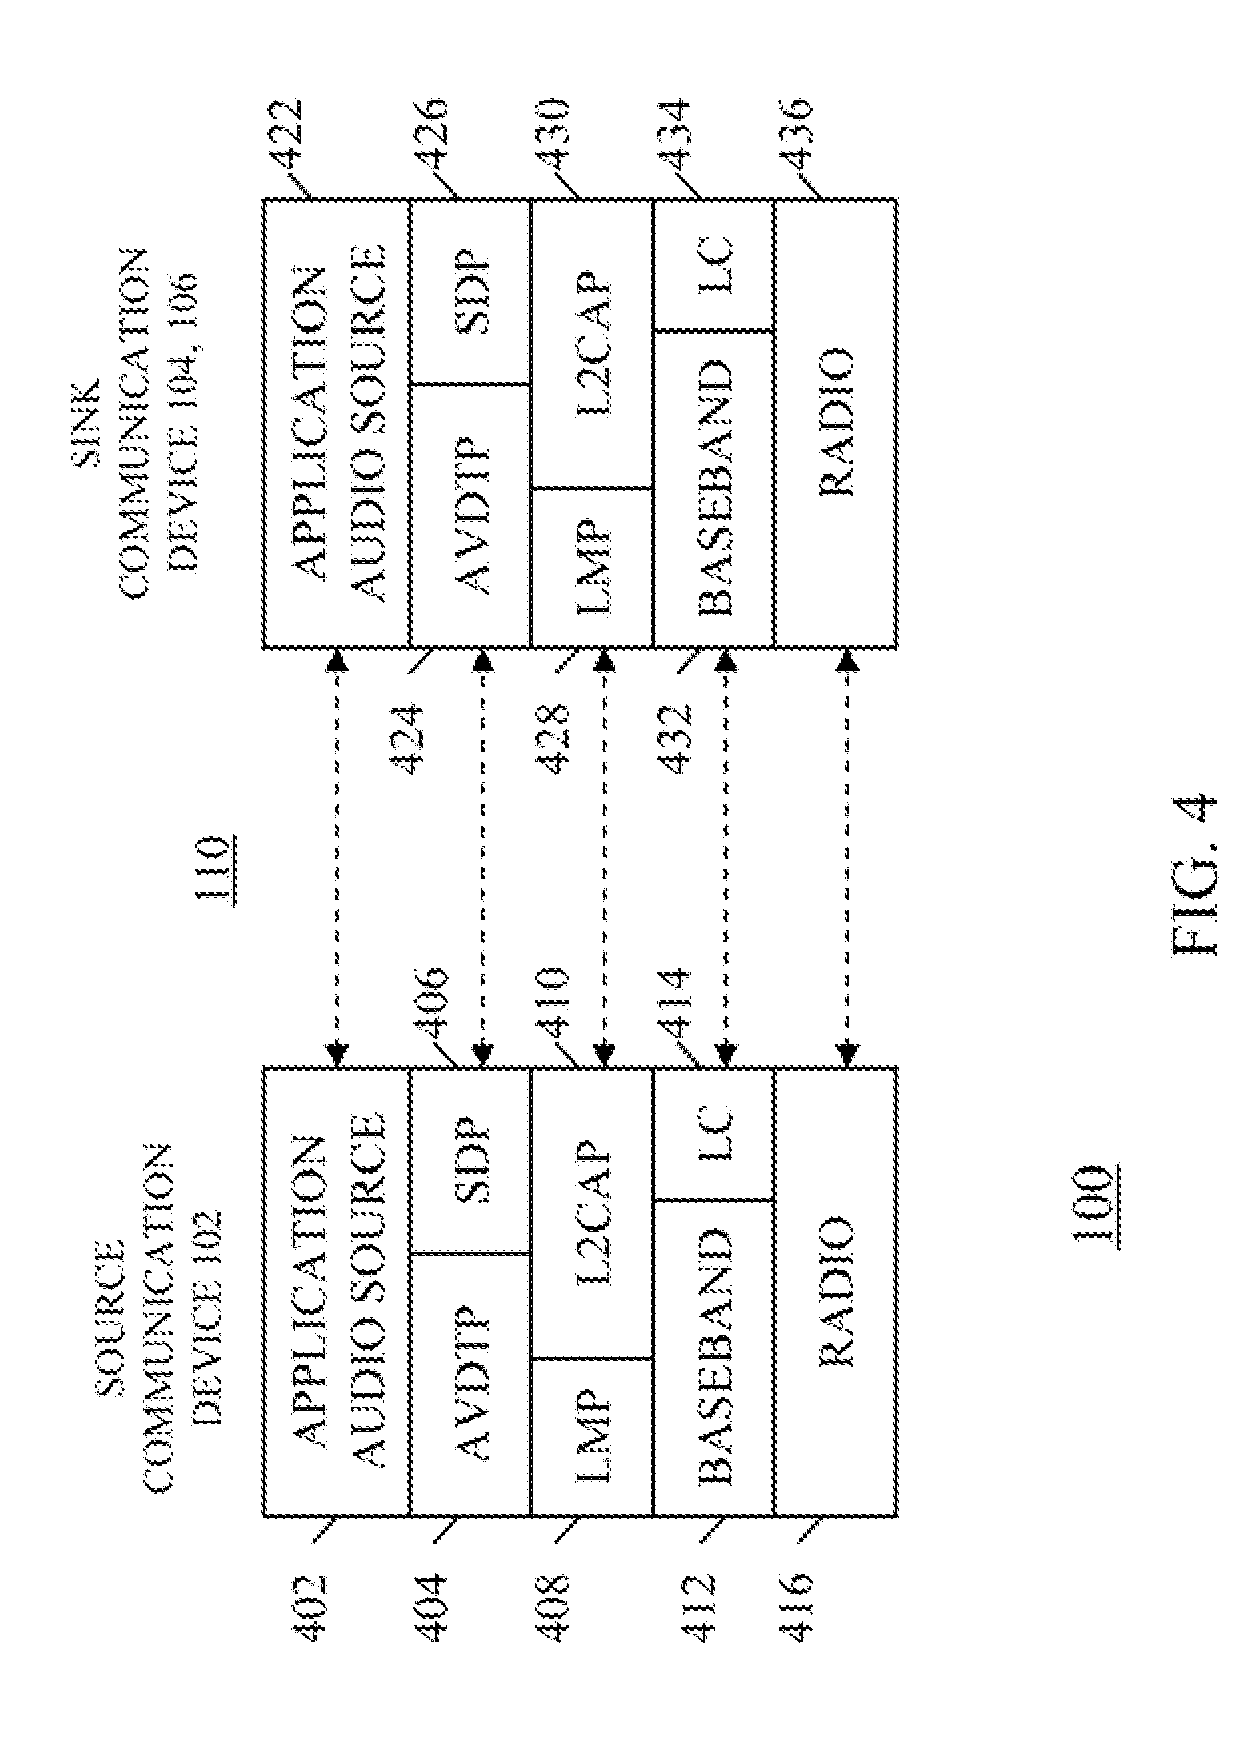 Method and apparatus for distributing data in a short-range wireless communication system